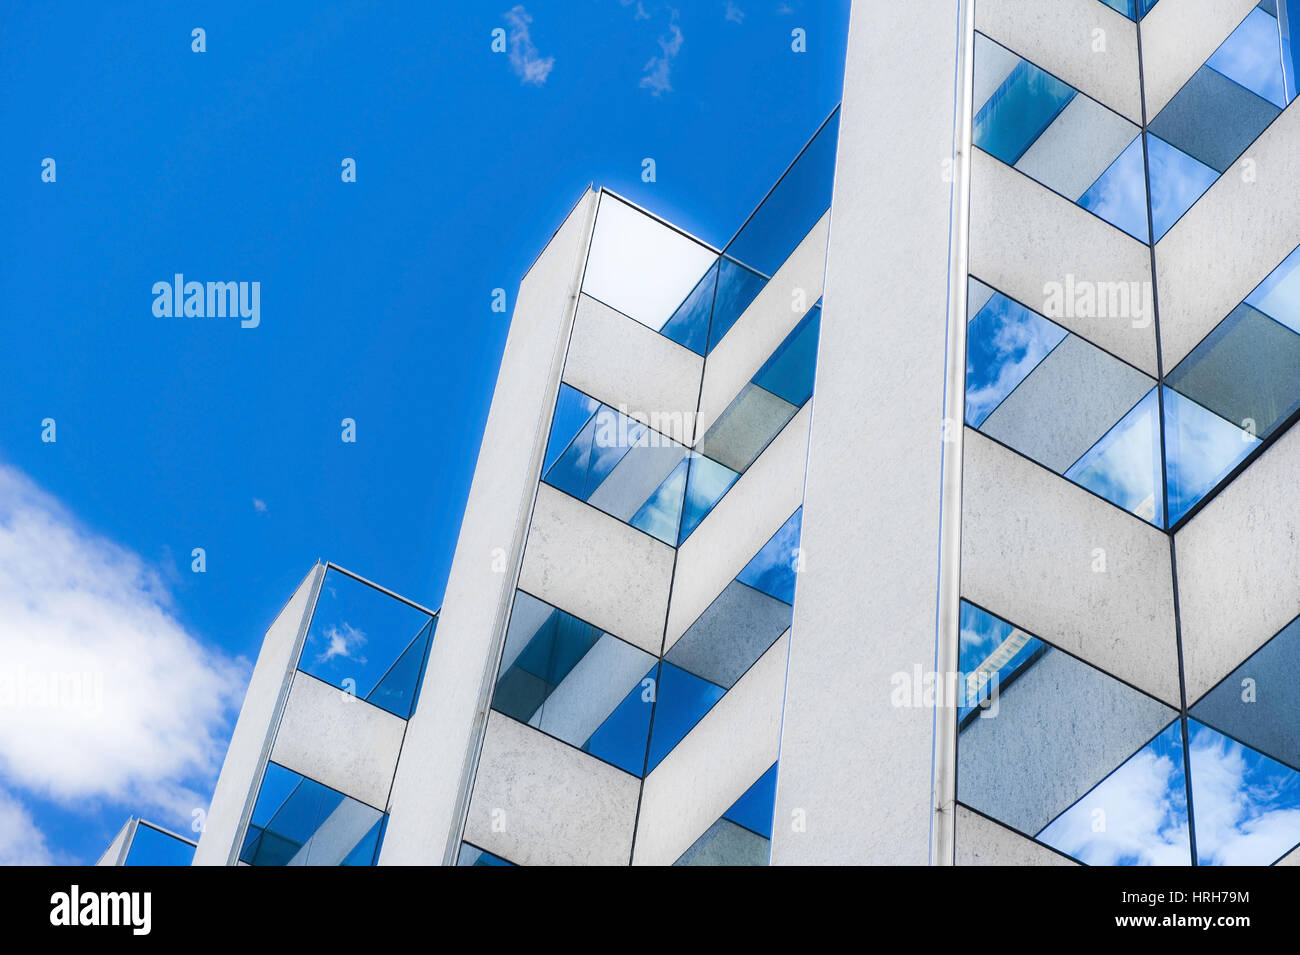 Modernes Hochhaus mit Wolkenspiegelung - modern high-rise building with relexion of clouds Stock Photo